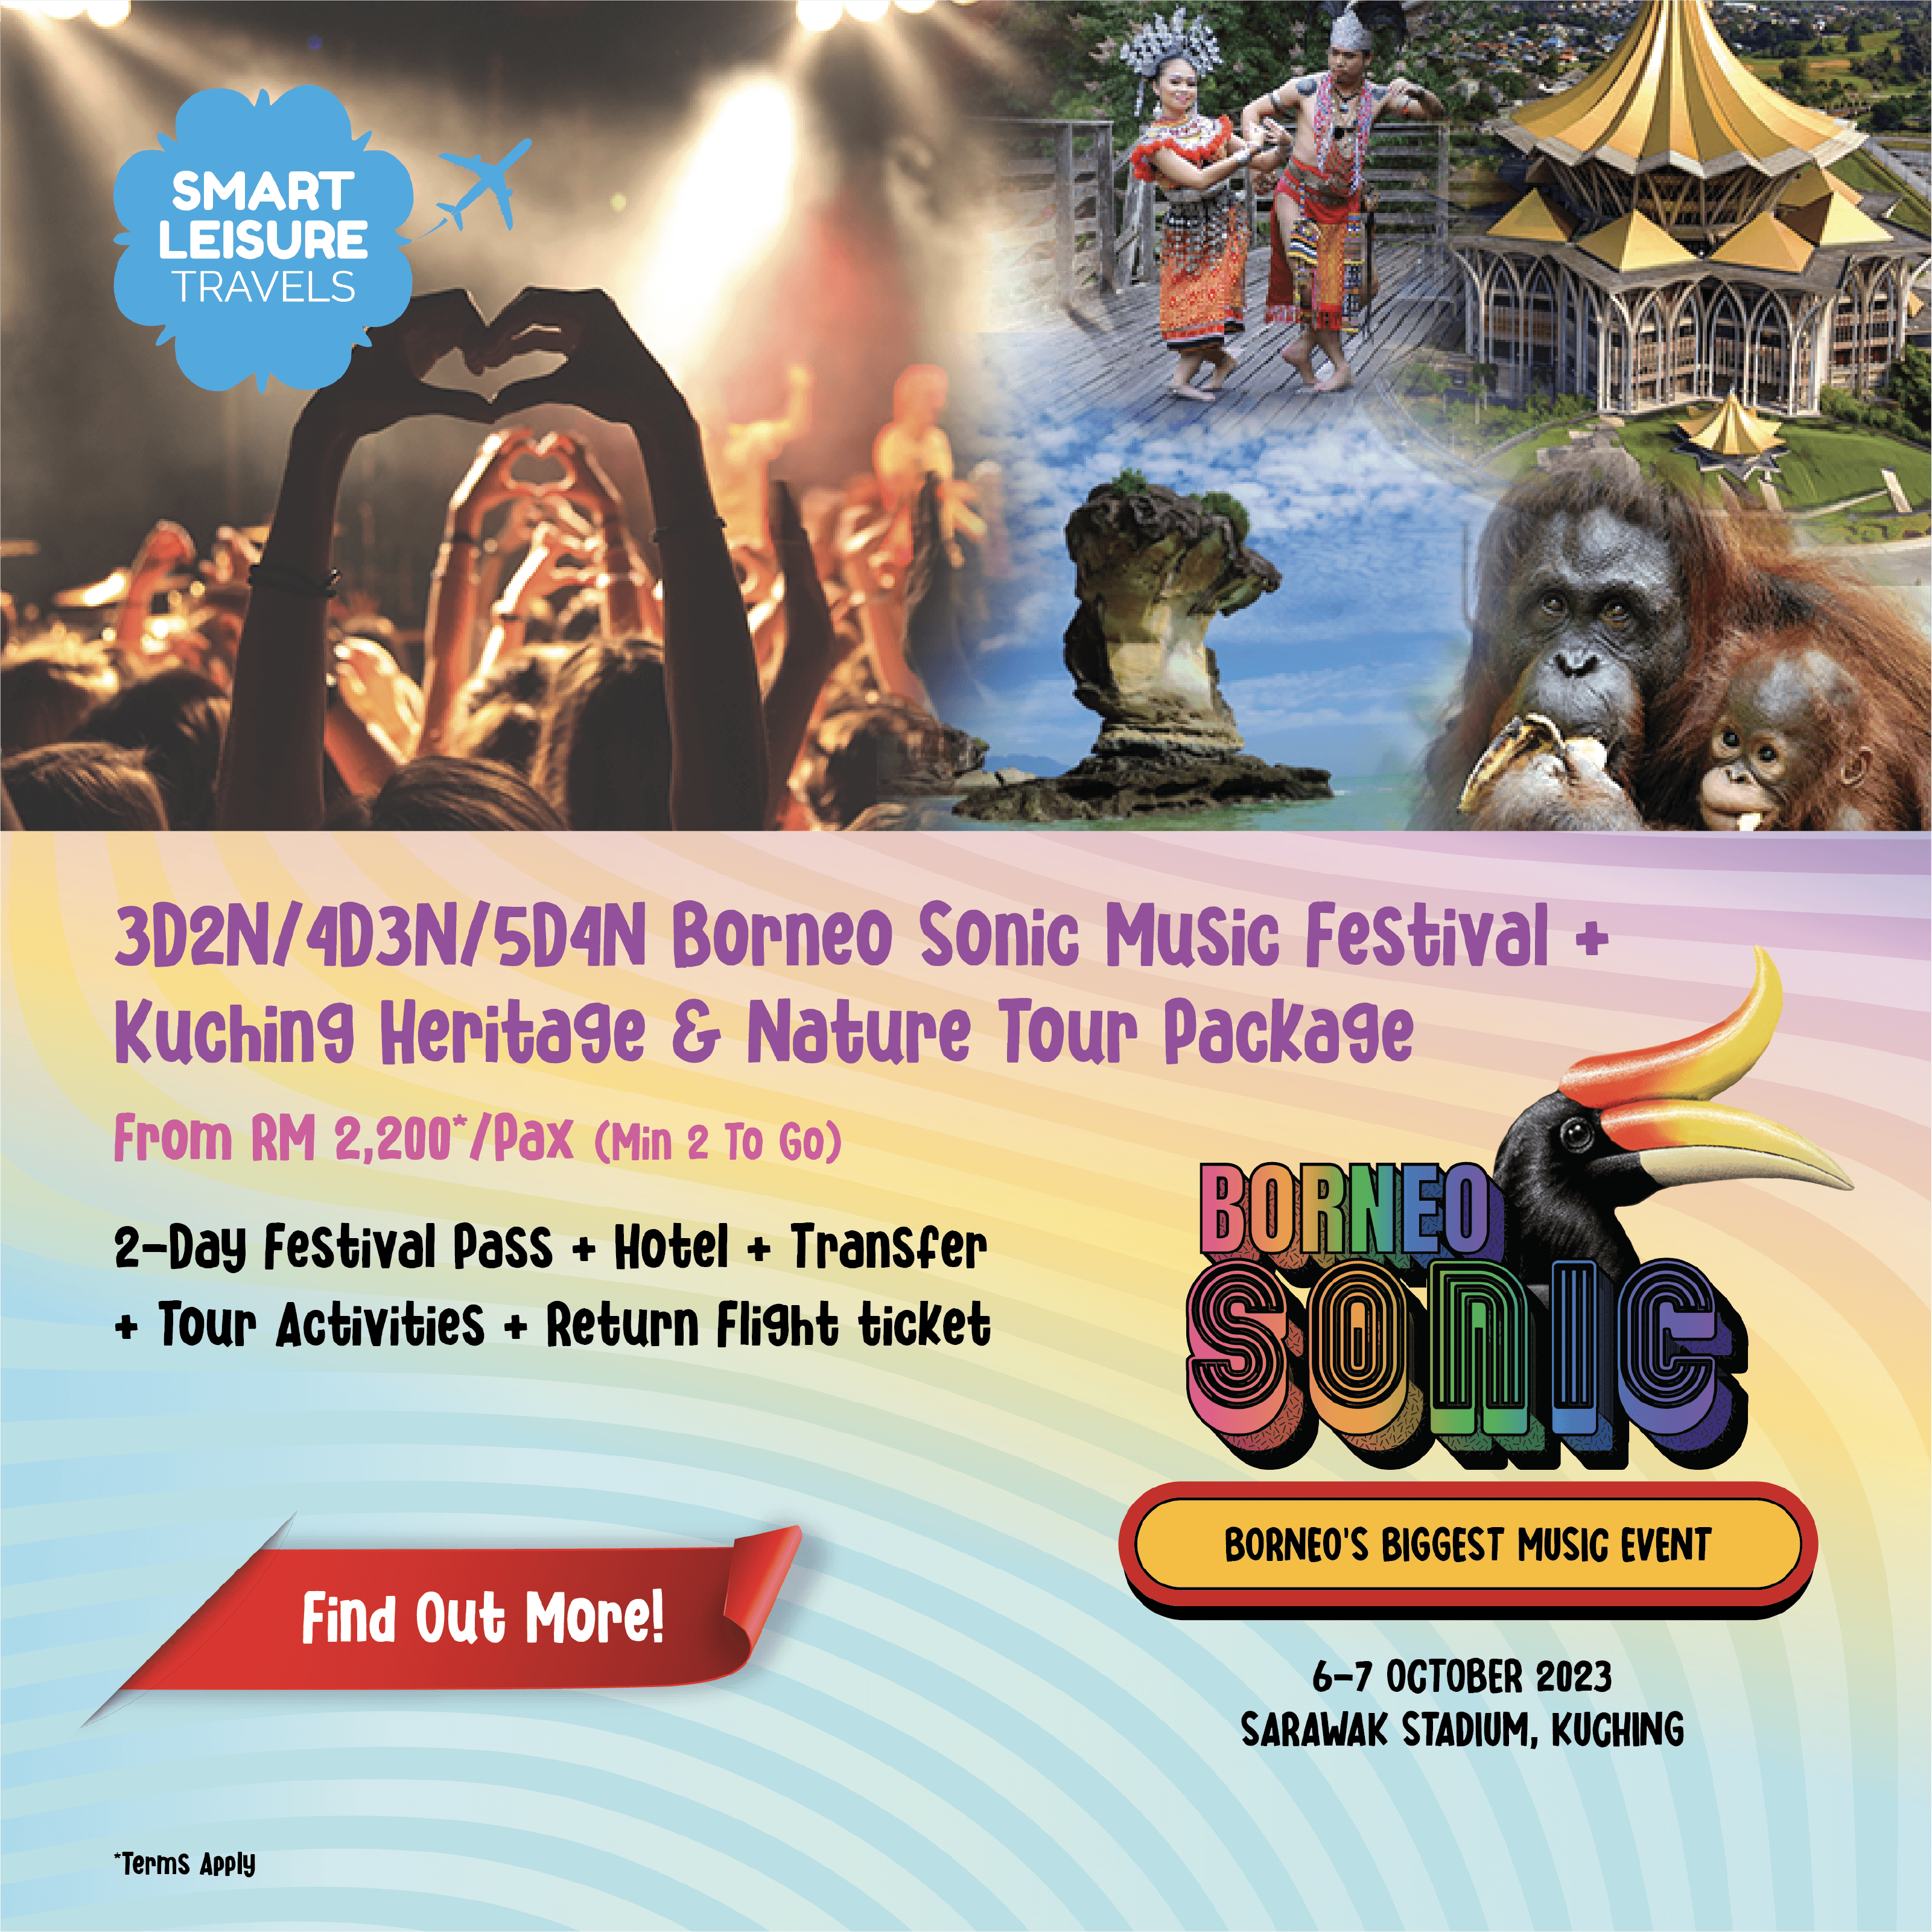 3D2N/4D3N/5D4N Borneo Sonic Music Festival + Kuching Heritage & Nature Tour Package